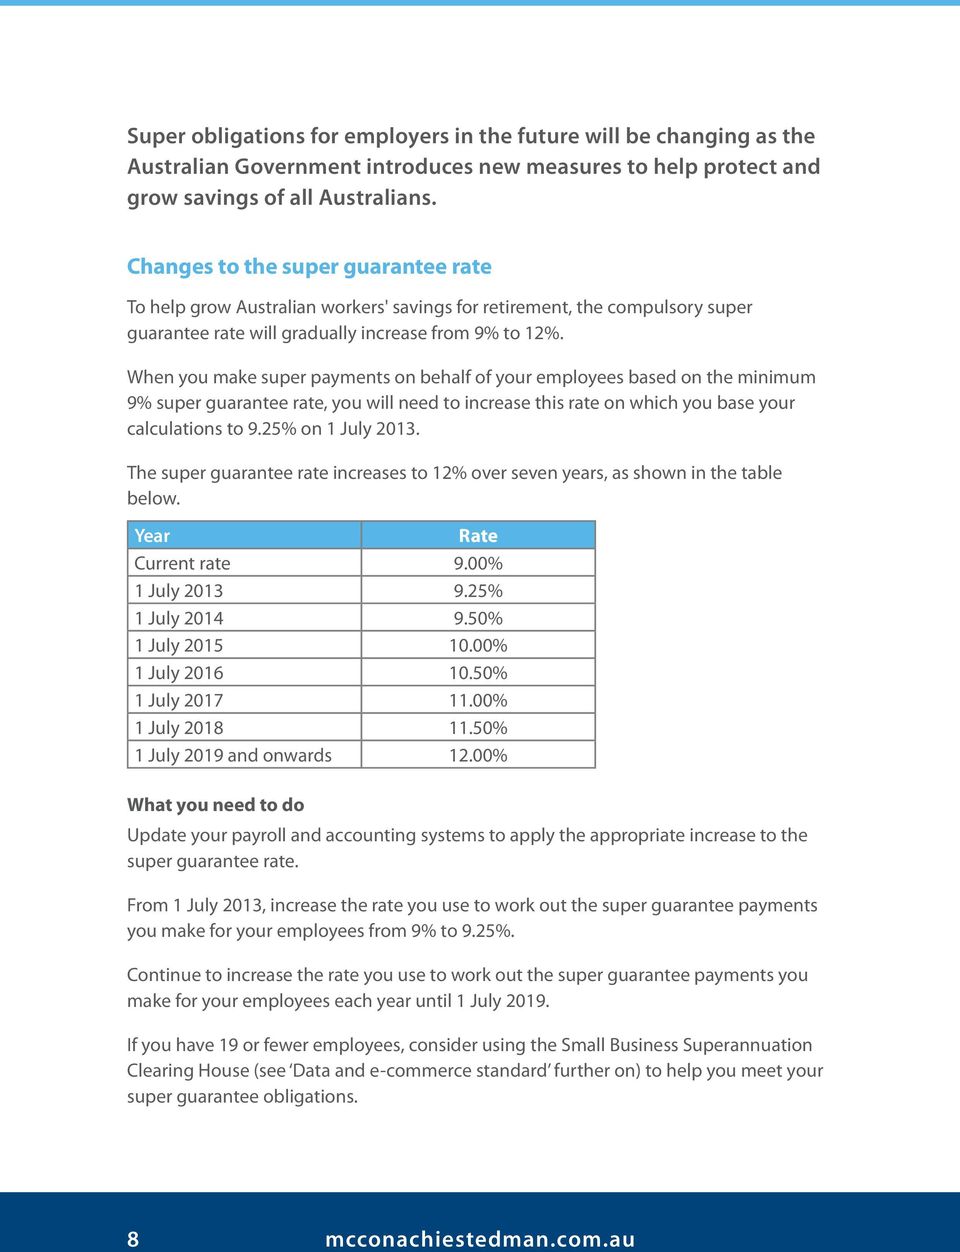 When you make super payments on behalf of your employees based on the minimum 9% super guarantee rate, you will need to increase this rate on which you base your calculations to 9.25% on 1 July 2013.